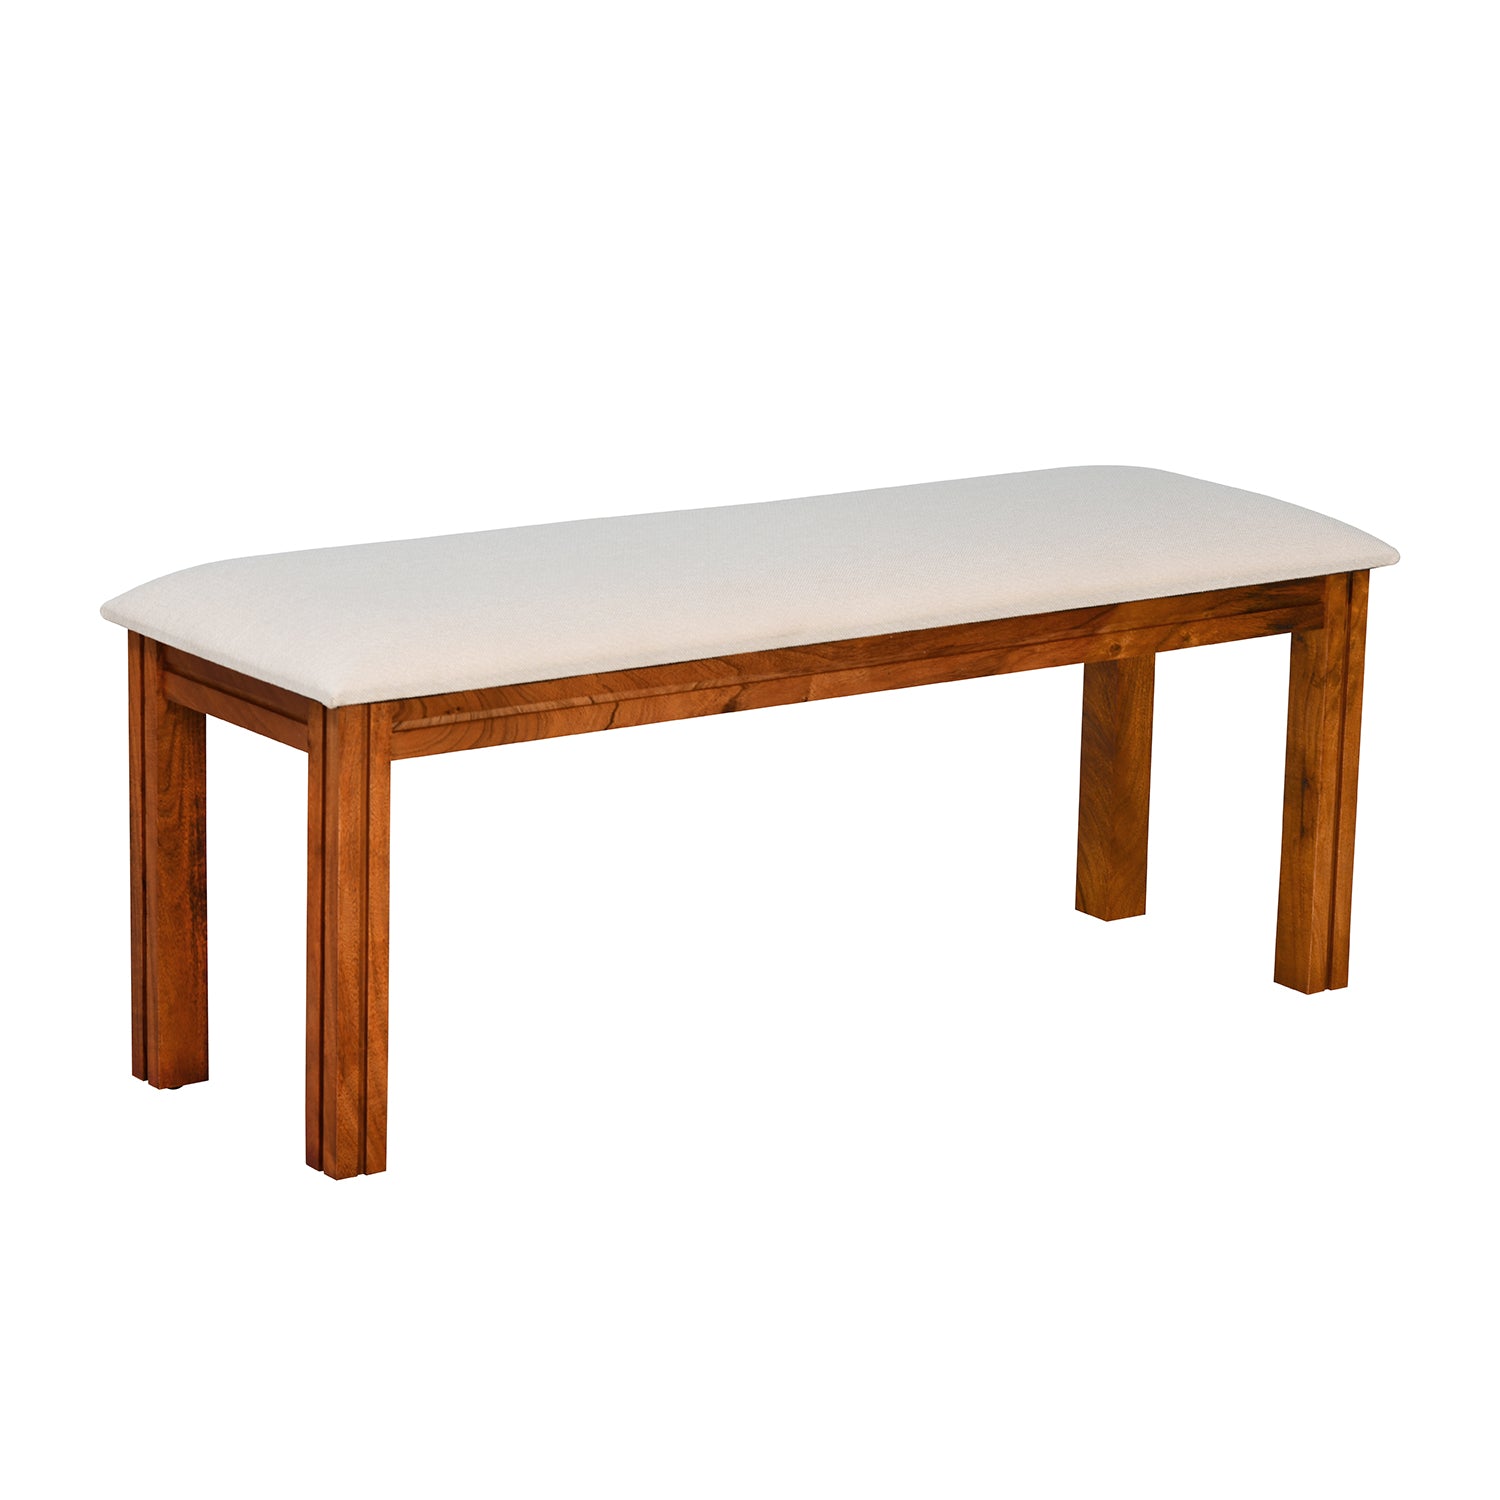 Cera 6 Seater Solid Wood Dining Bench (Honey Brown)